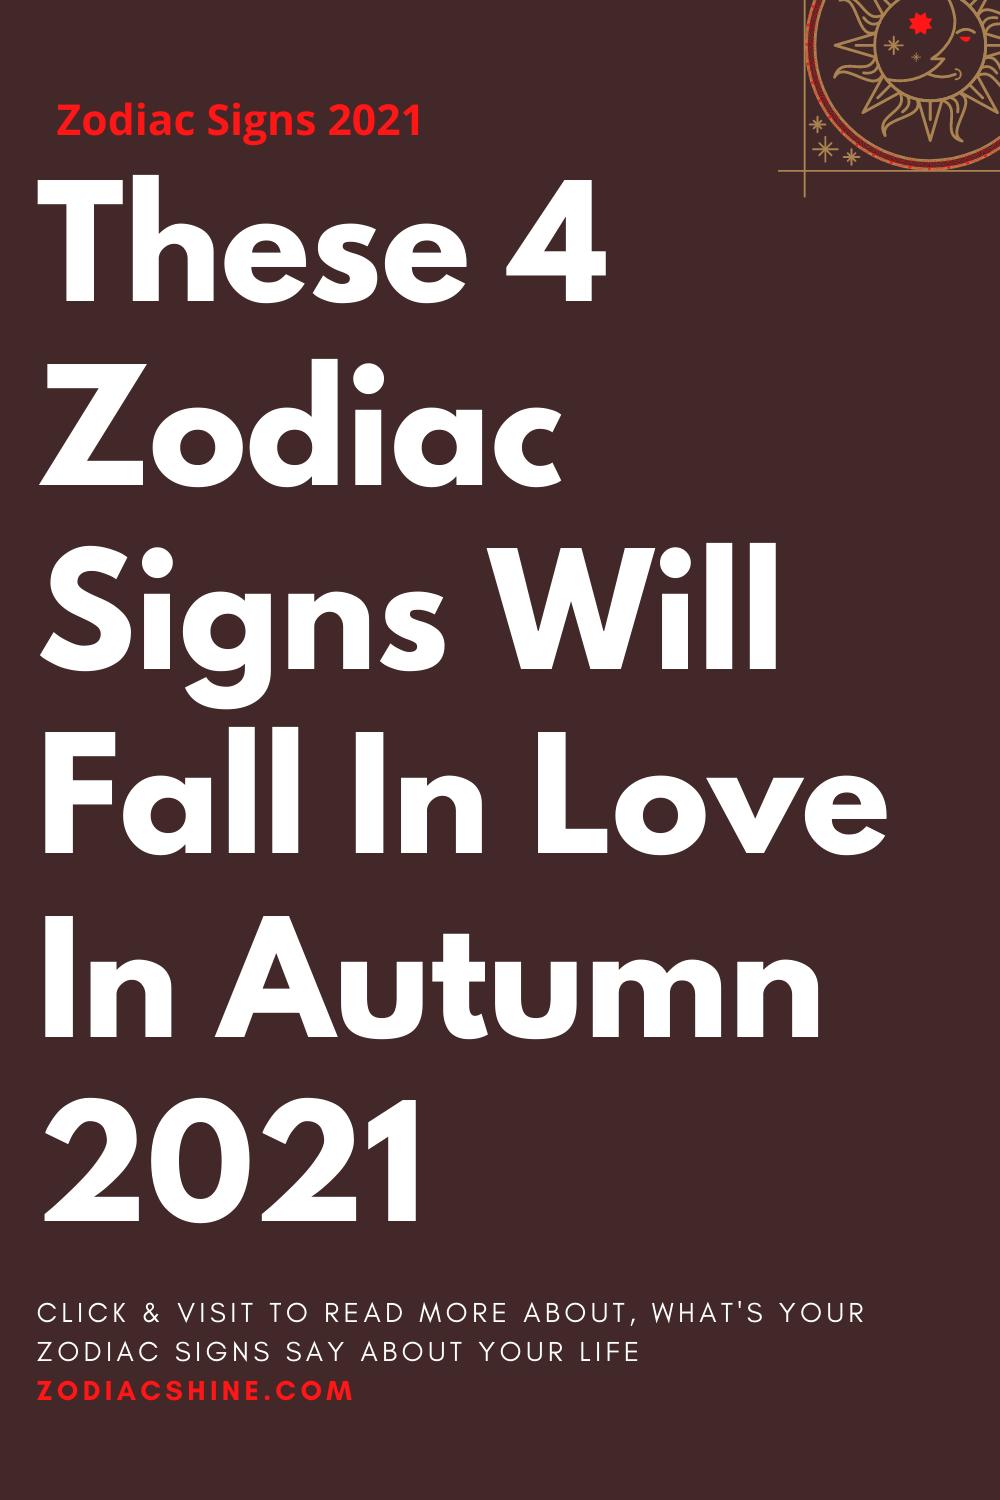 These 4 Zodiac Signs Will Fall In Love In Autumn 2021